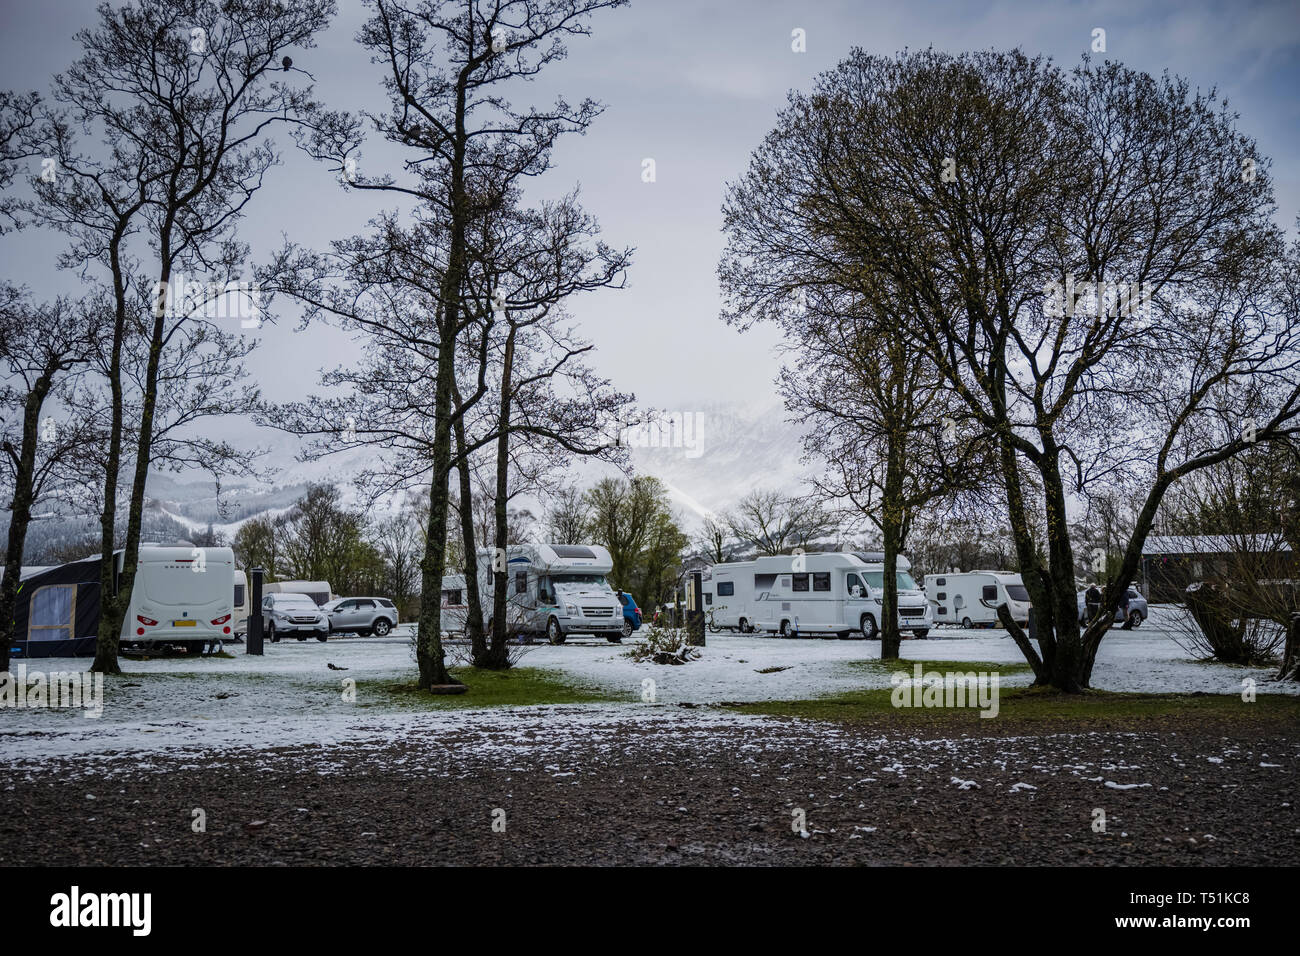 Camping and Caravanning Club site with Spring snow at Keswick, Cumbria, UK. Stock Photo